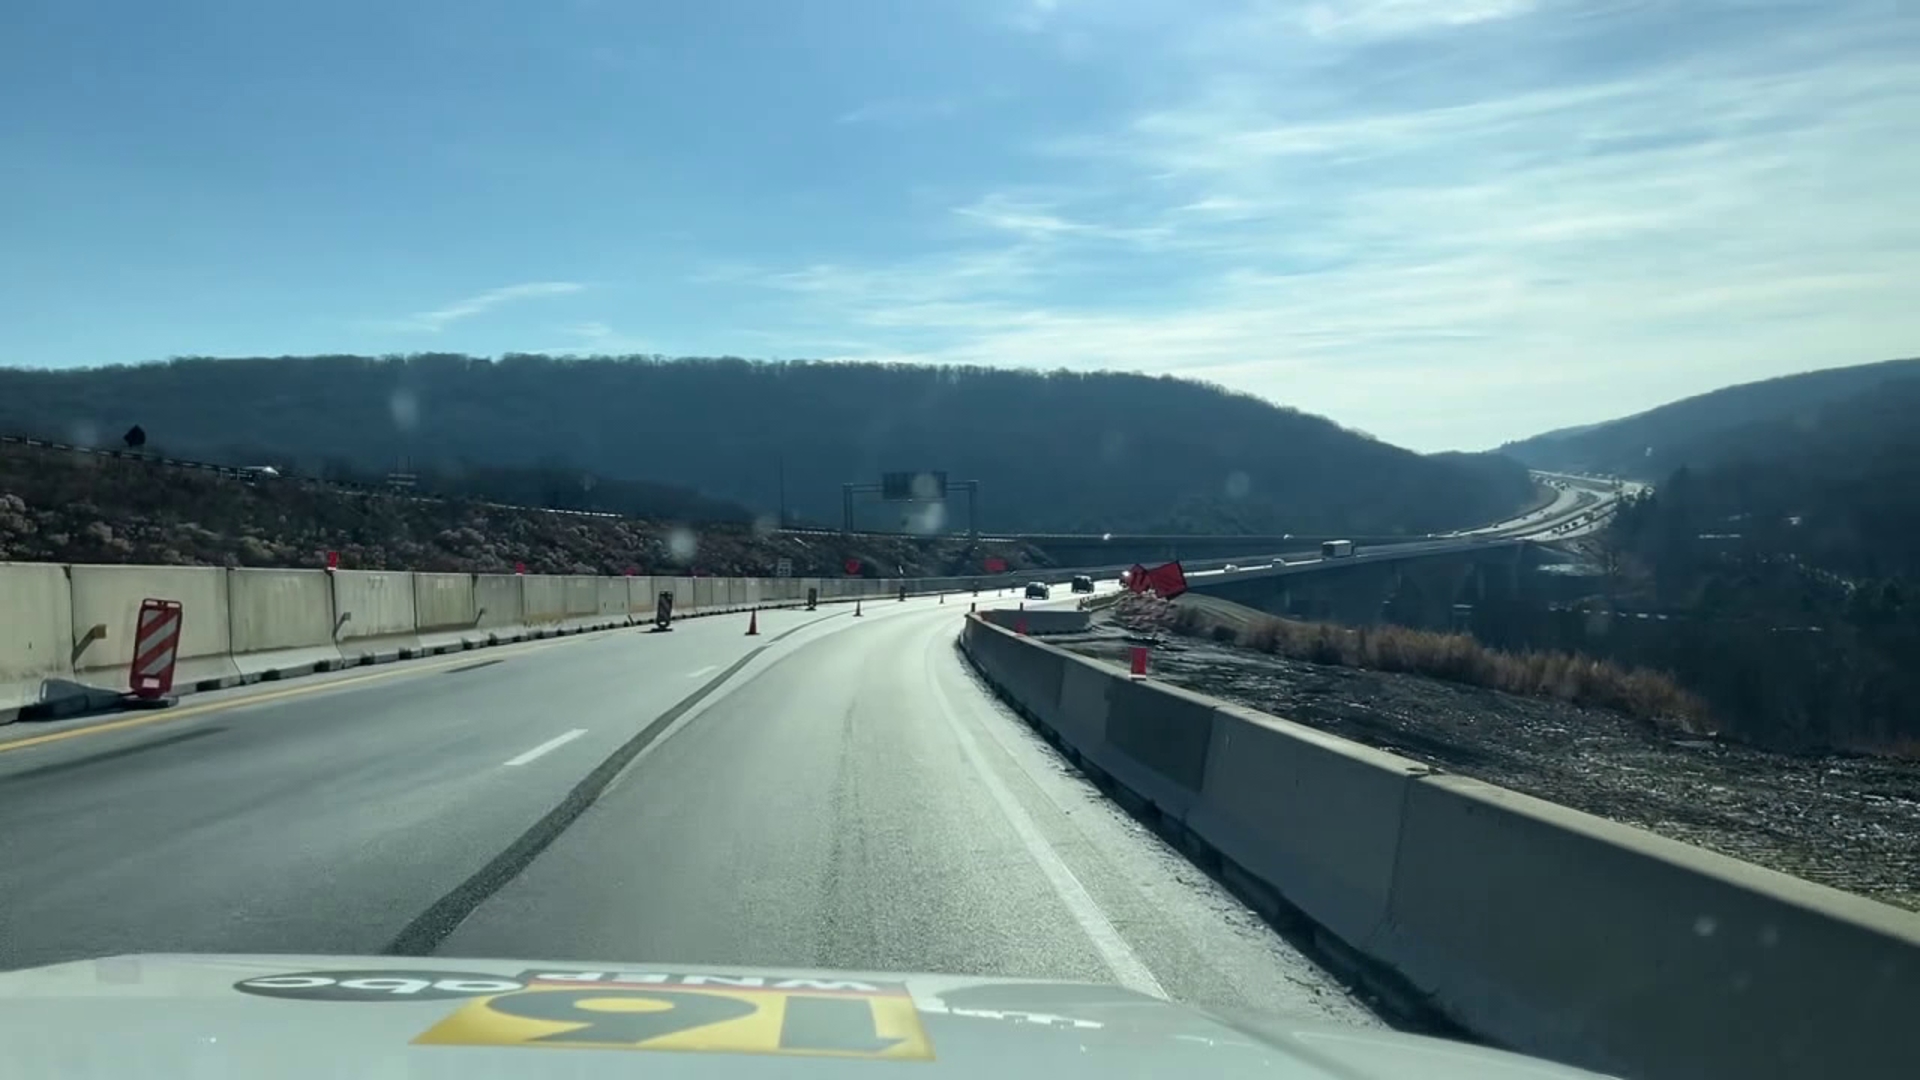 There will be lane restrictions near construction areas on Interstate 84 East and West in Lackawanna County starting Thursday night.